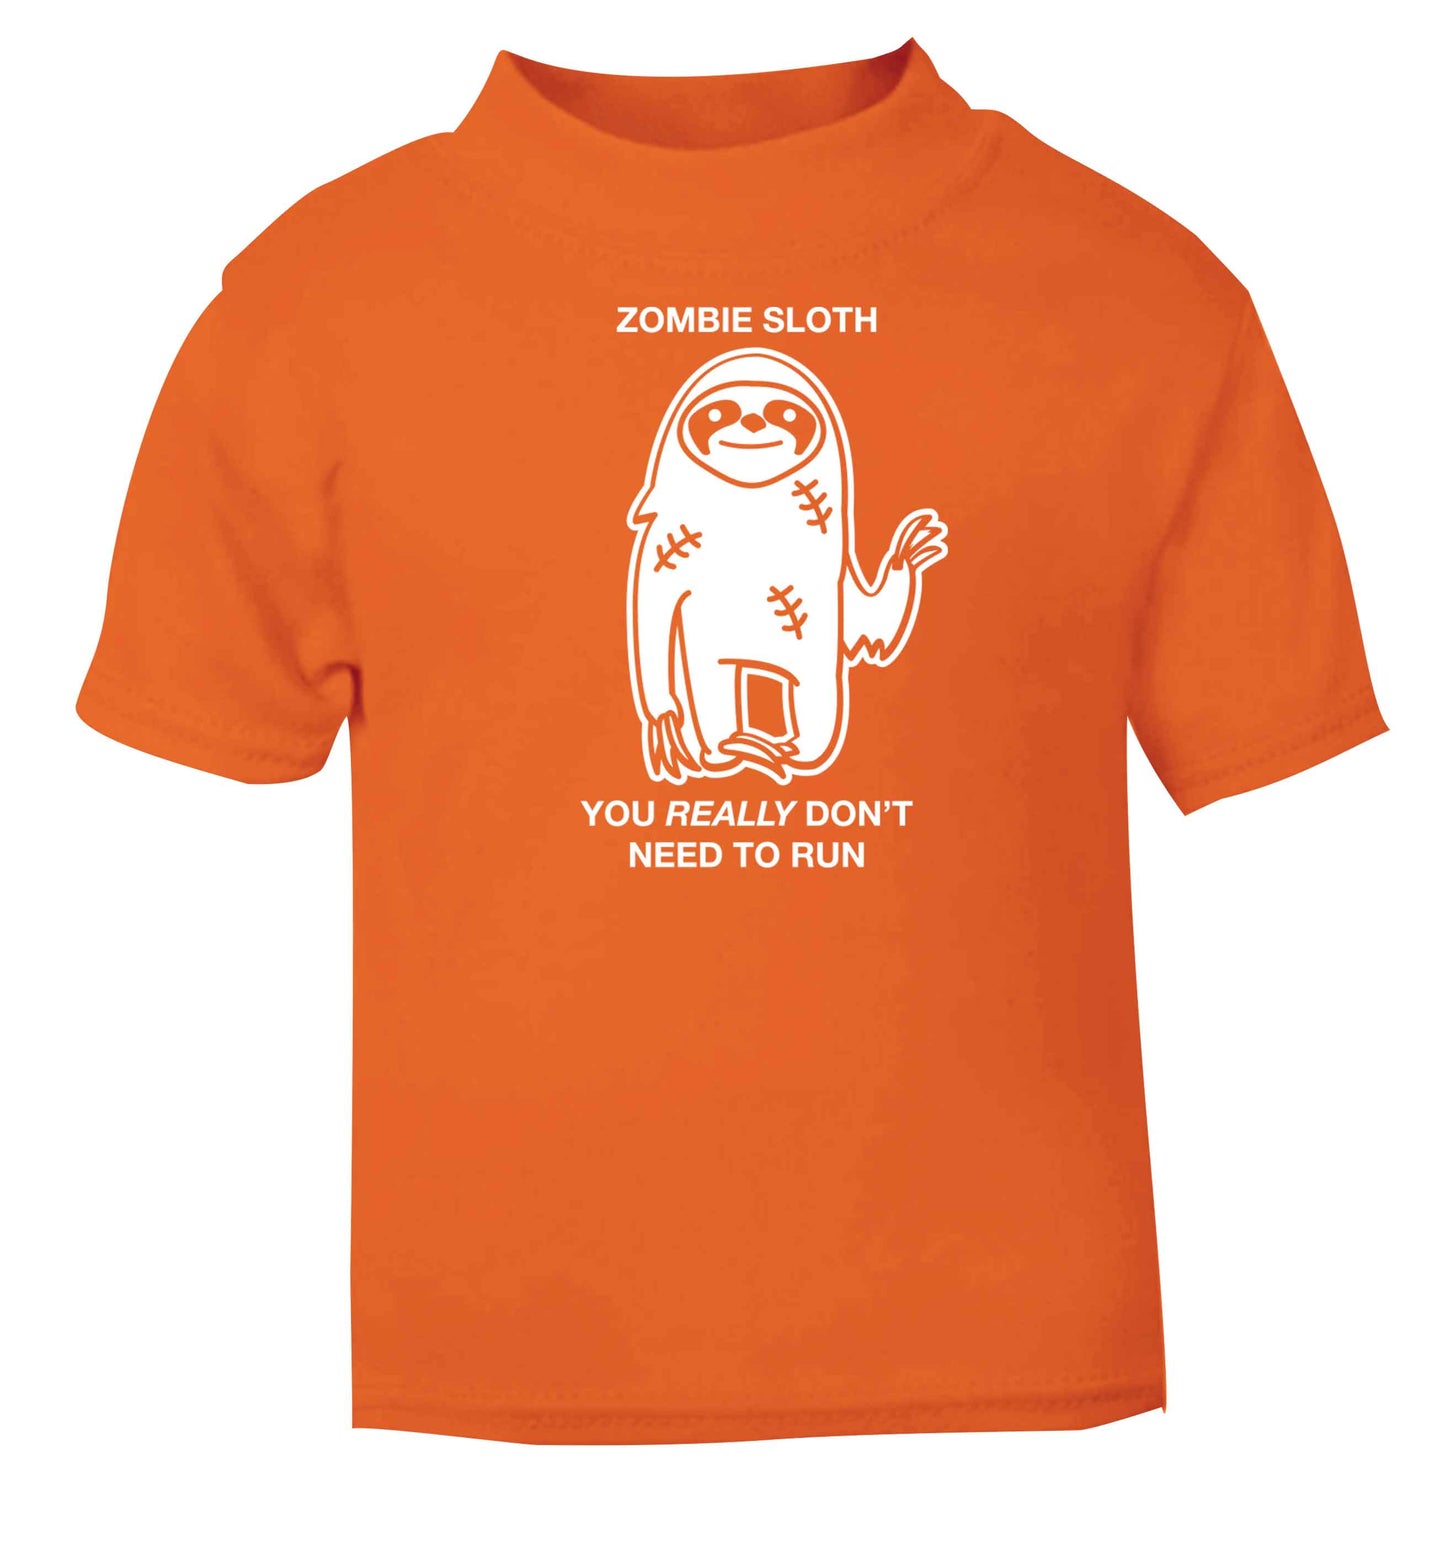 Zombie sloth you really don't need to run orange baby toddler Tshirt 2 Years